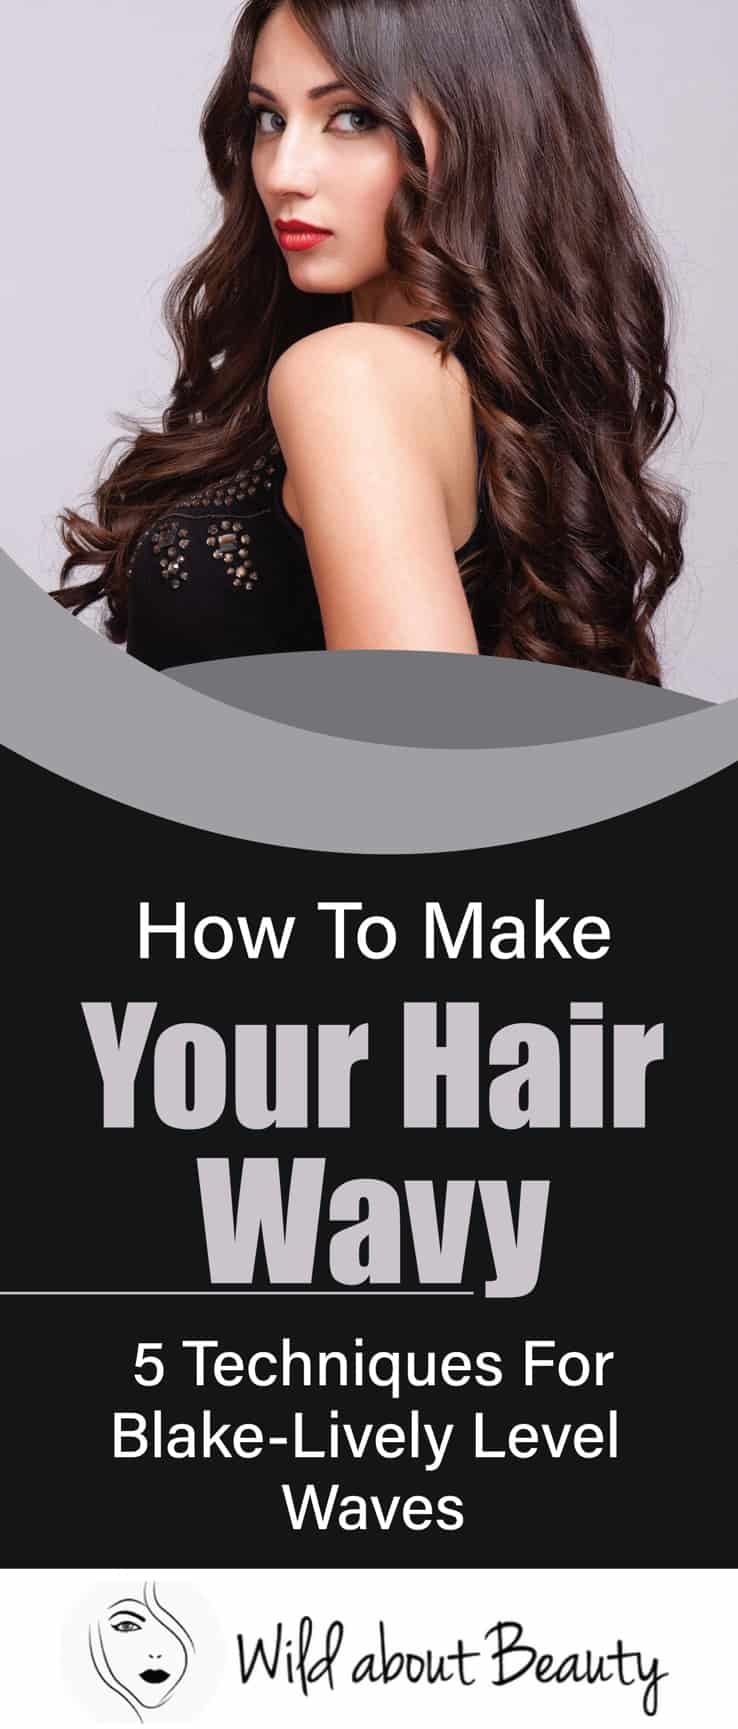 How To Make Your Hair Wavy